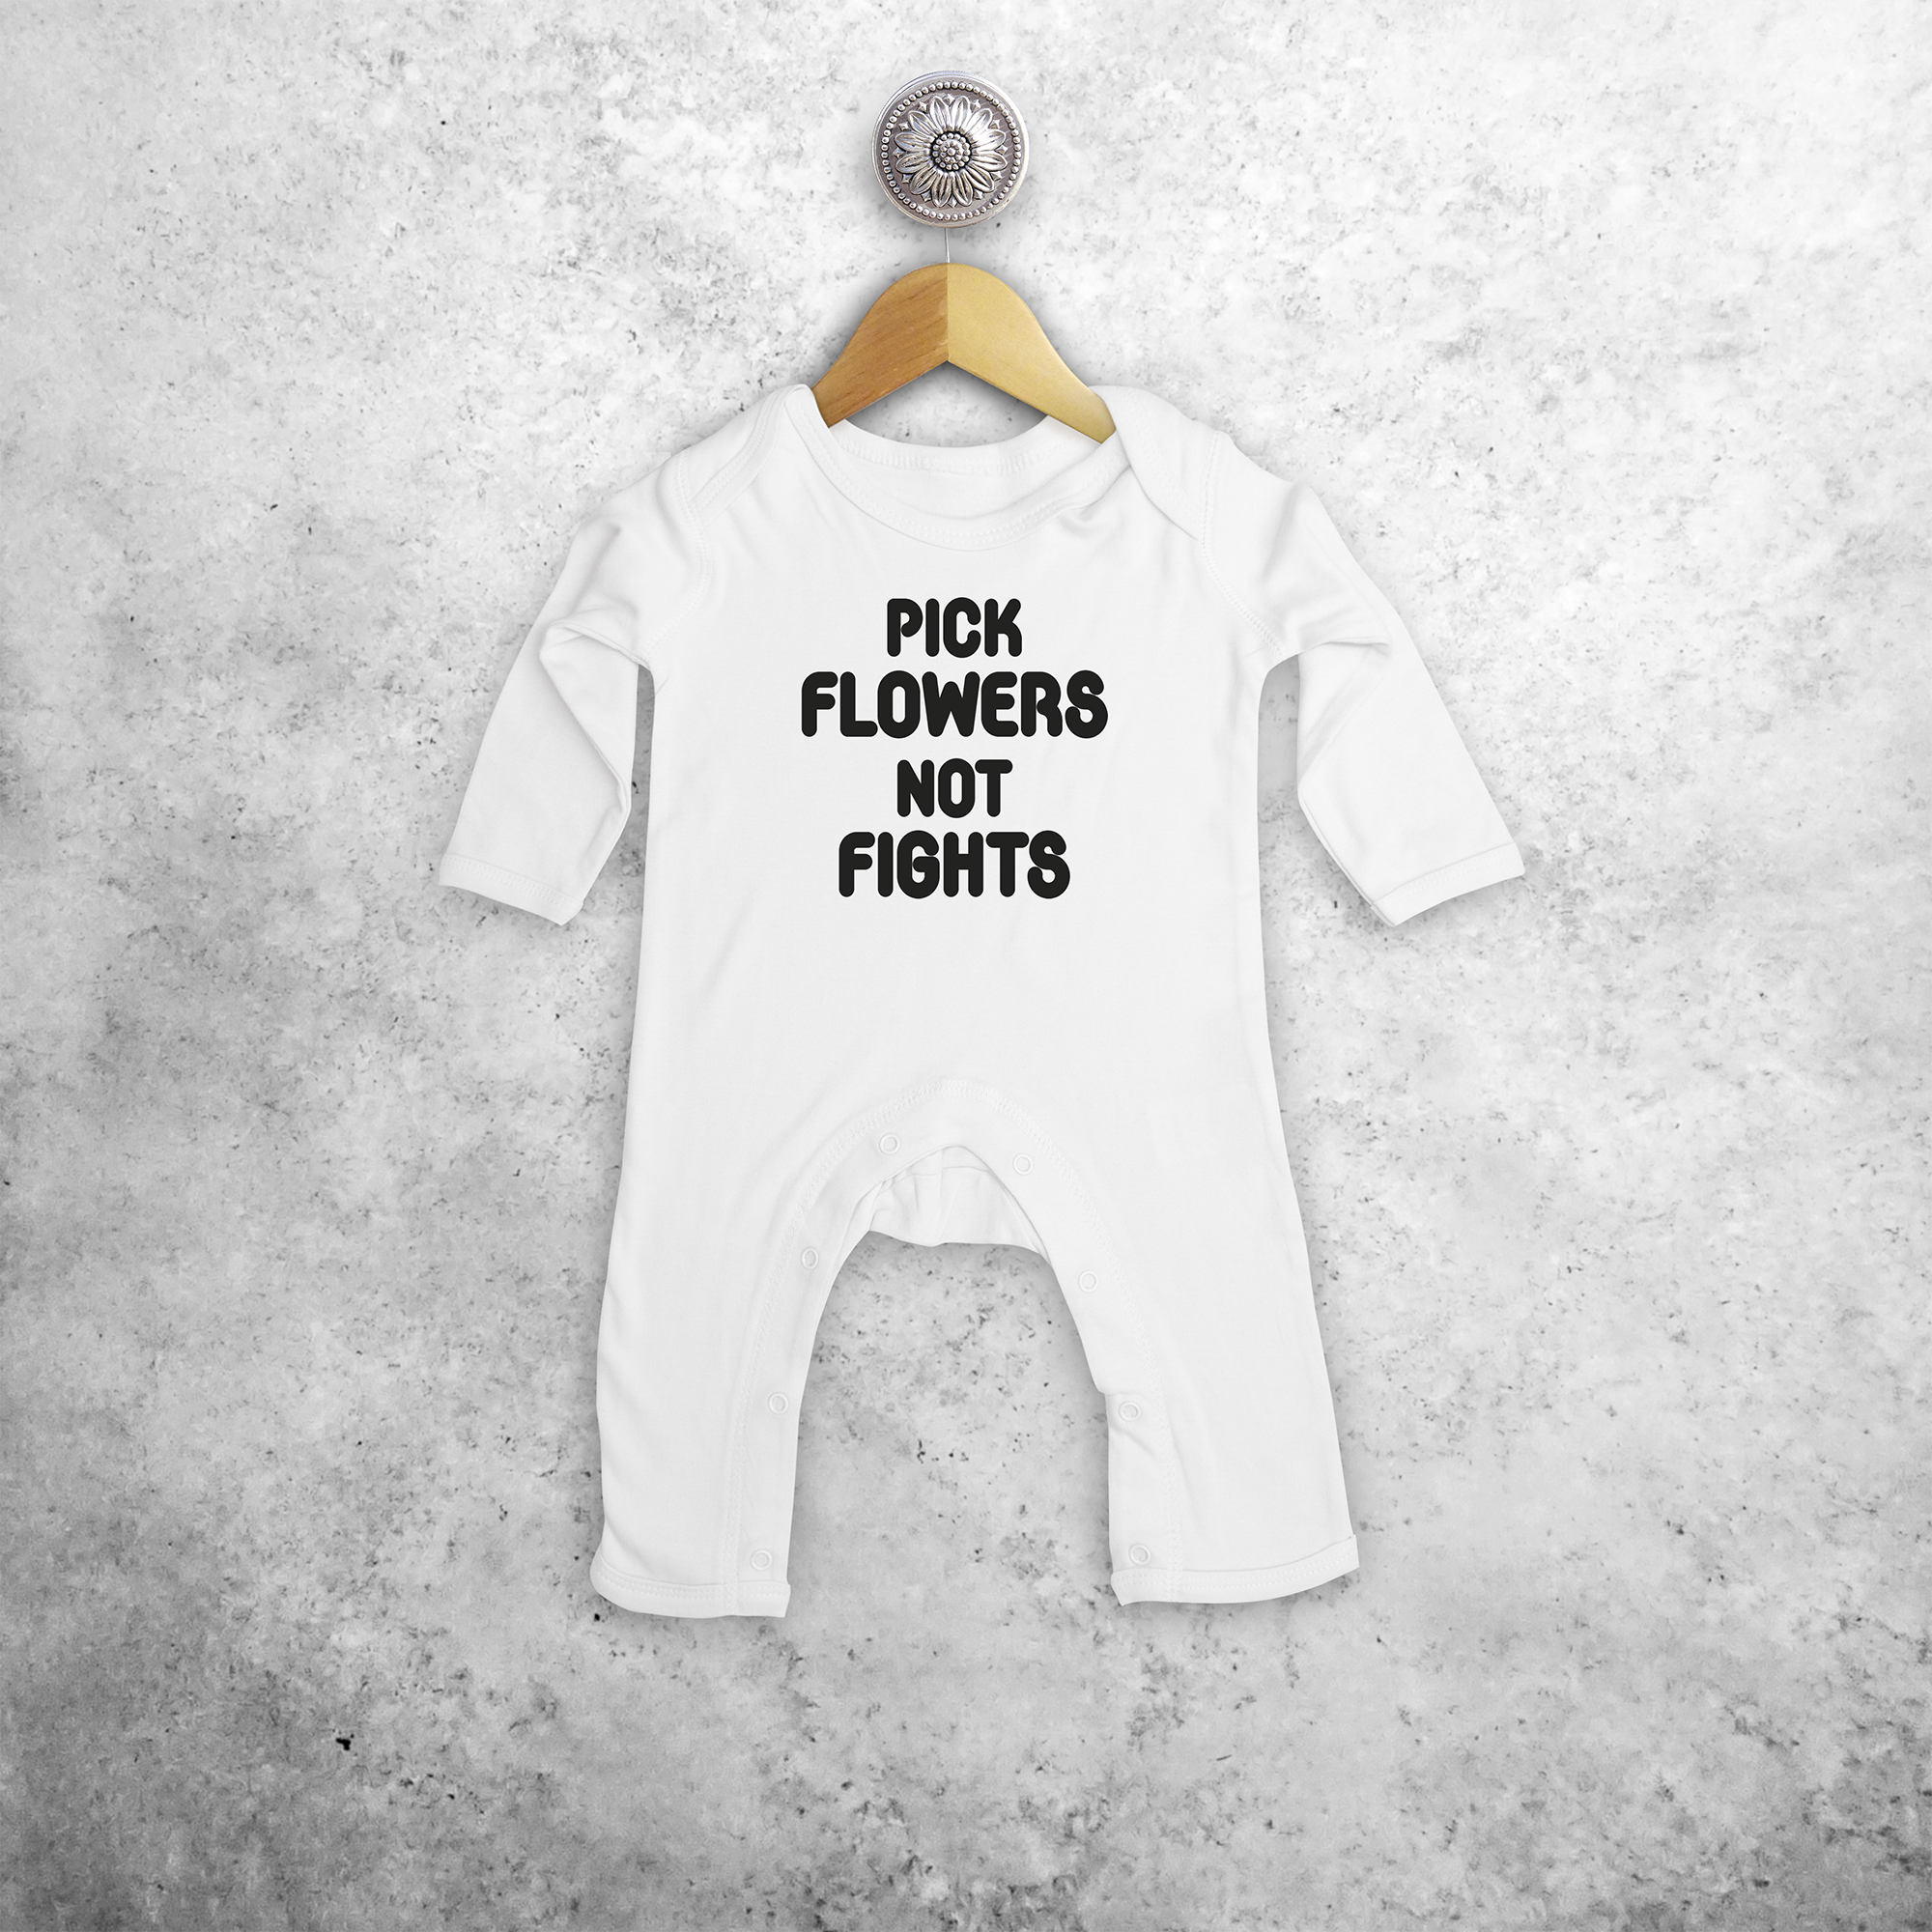 'Pick flowers not fights' baby romper